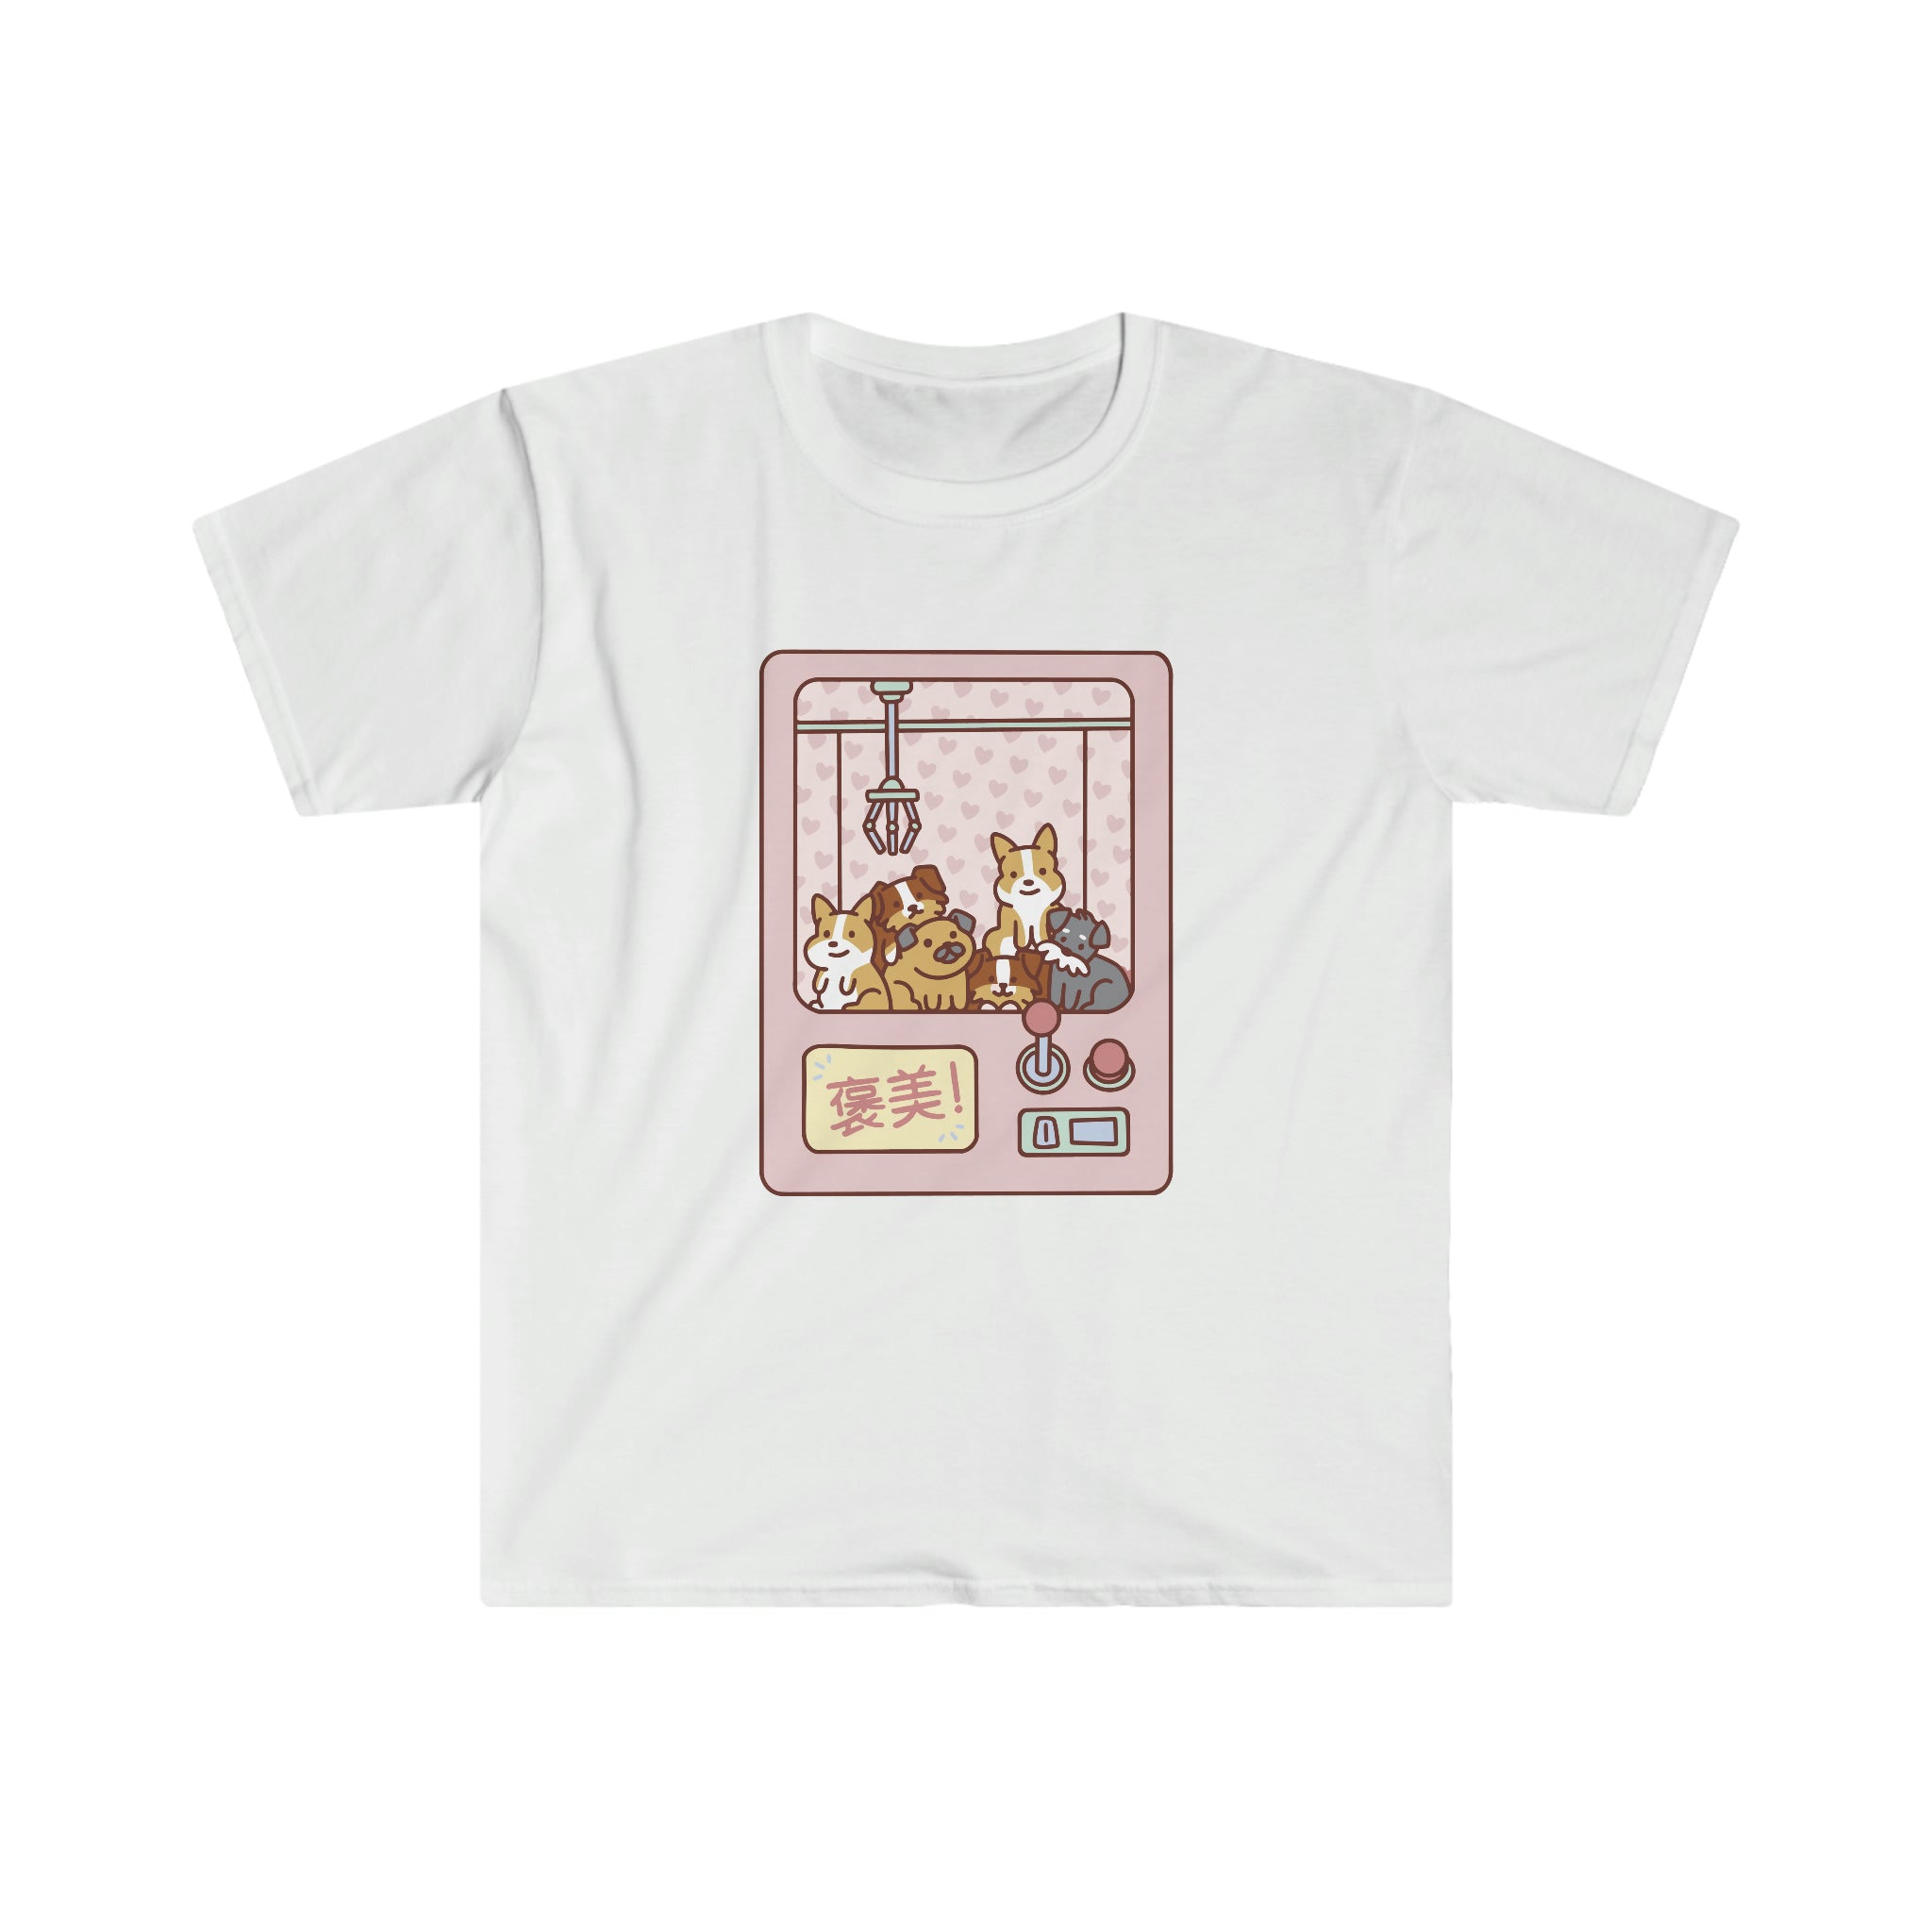 A white Cute Clew t-shirt with an image of a dog in a Printify machine.